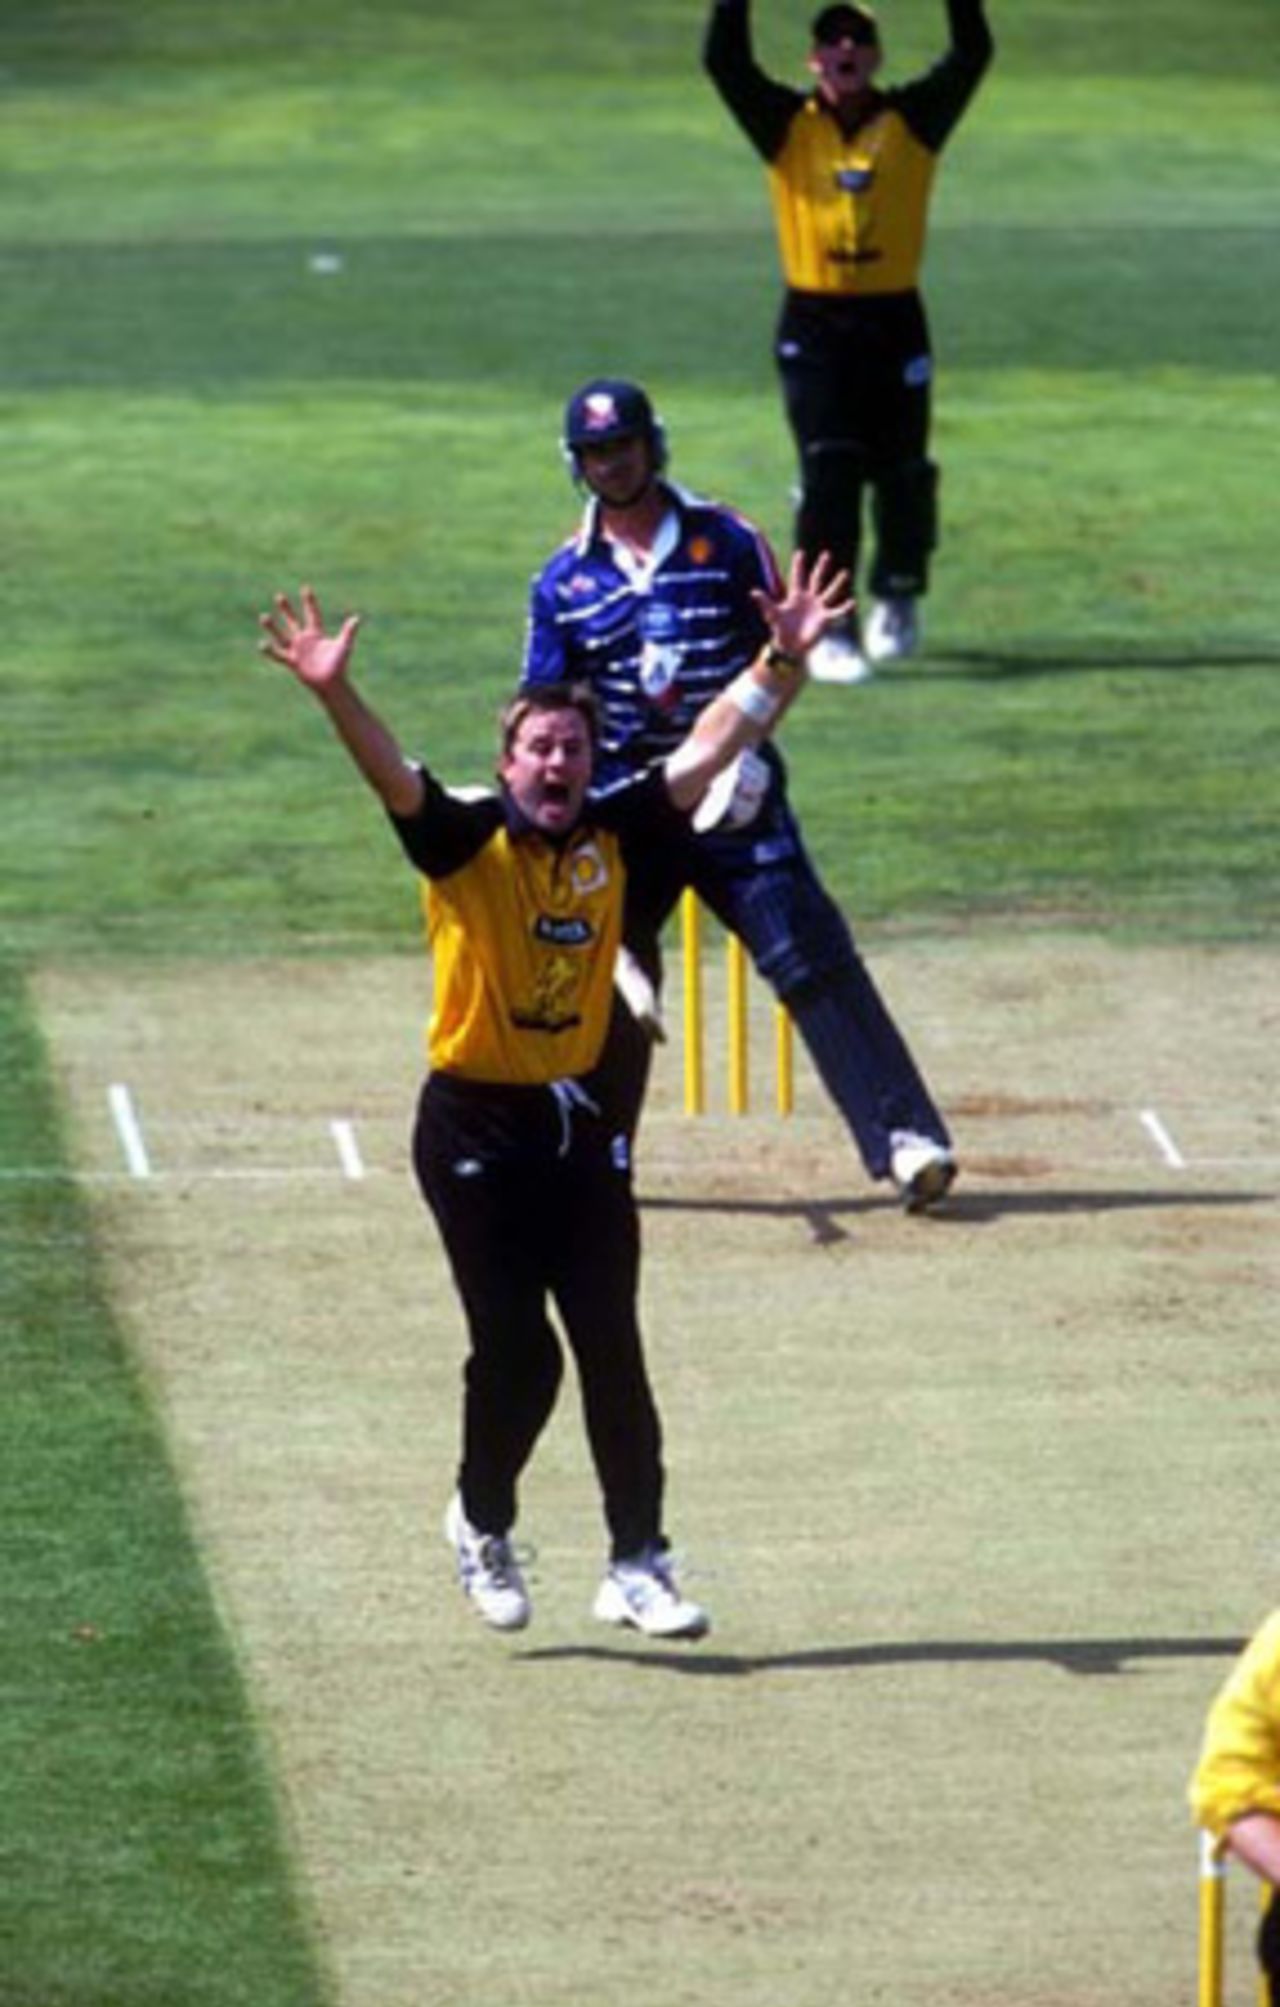 Wellington bowler Paul Hitchcock unsuccessfully appeals for lbw against Auckland batsman Dion Nash during his spell of 1-41 from 10 overs. Wicket-keeper Chris Nevin appeals in the background. Shell Cup: Auckland v Wellington at Eden Park Outer Oval, Auckland, 27 December 2000.